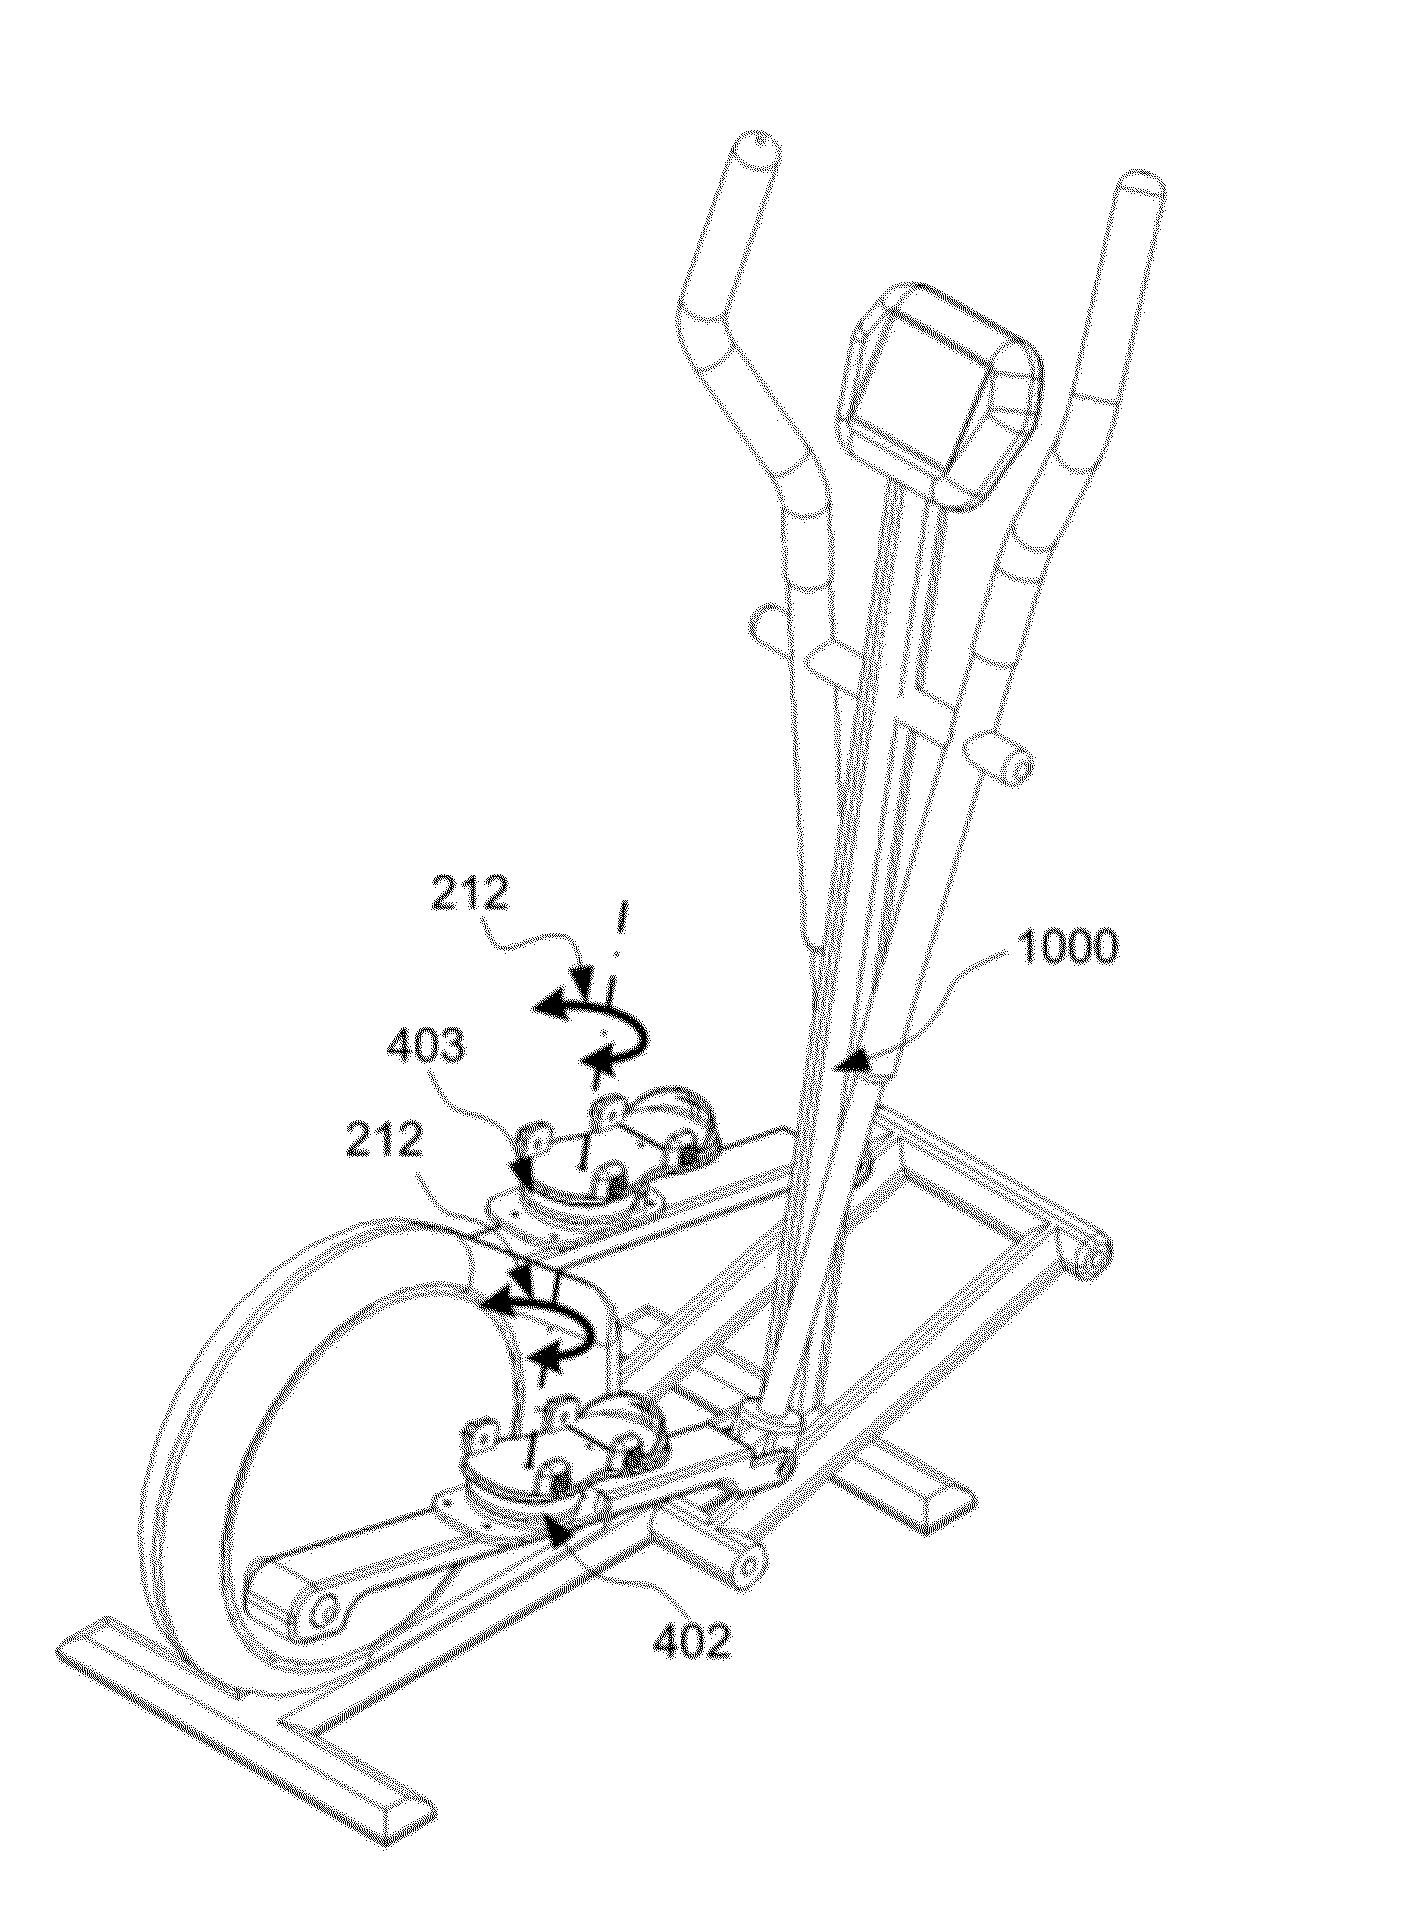 Lower-Limb off-axis training apparatus and system